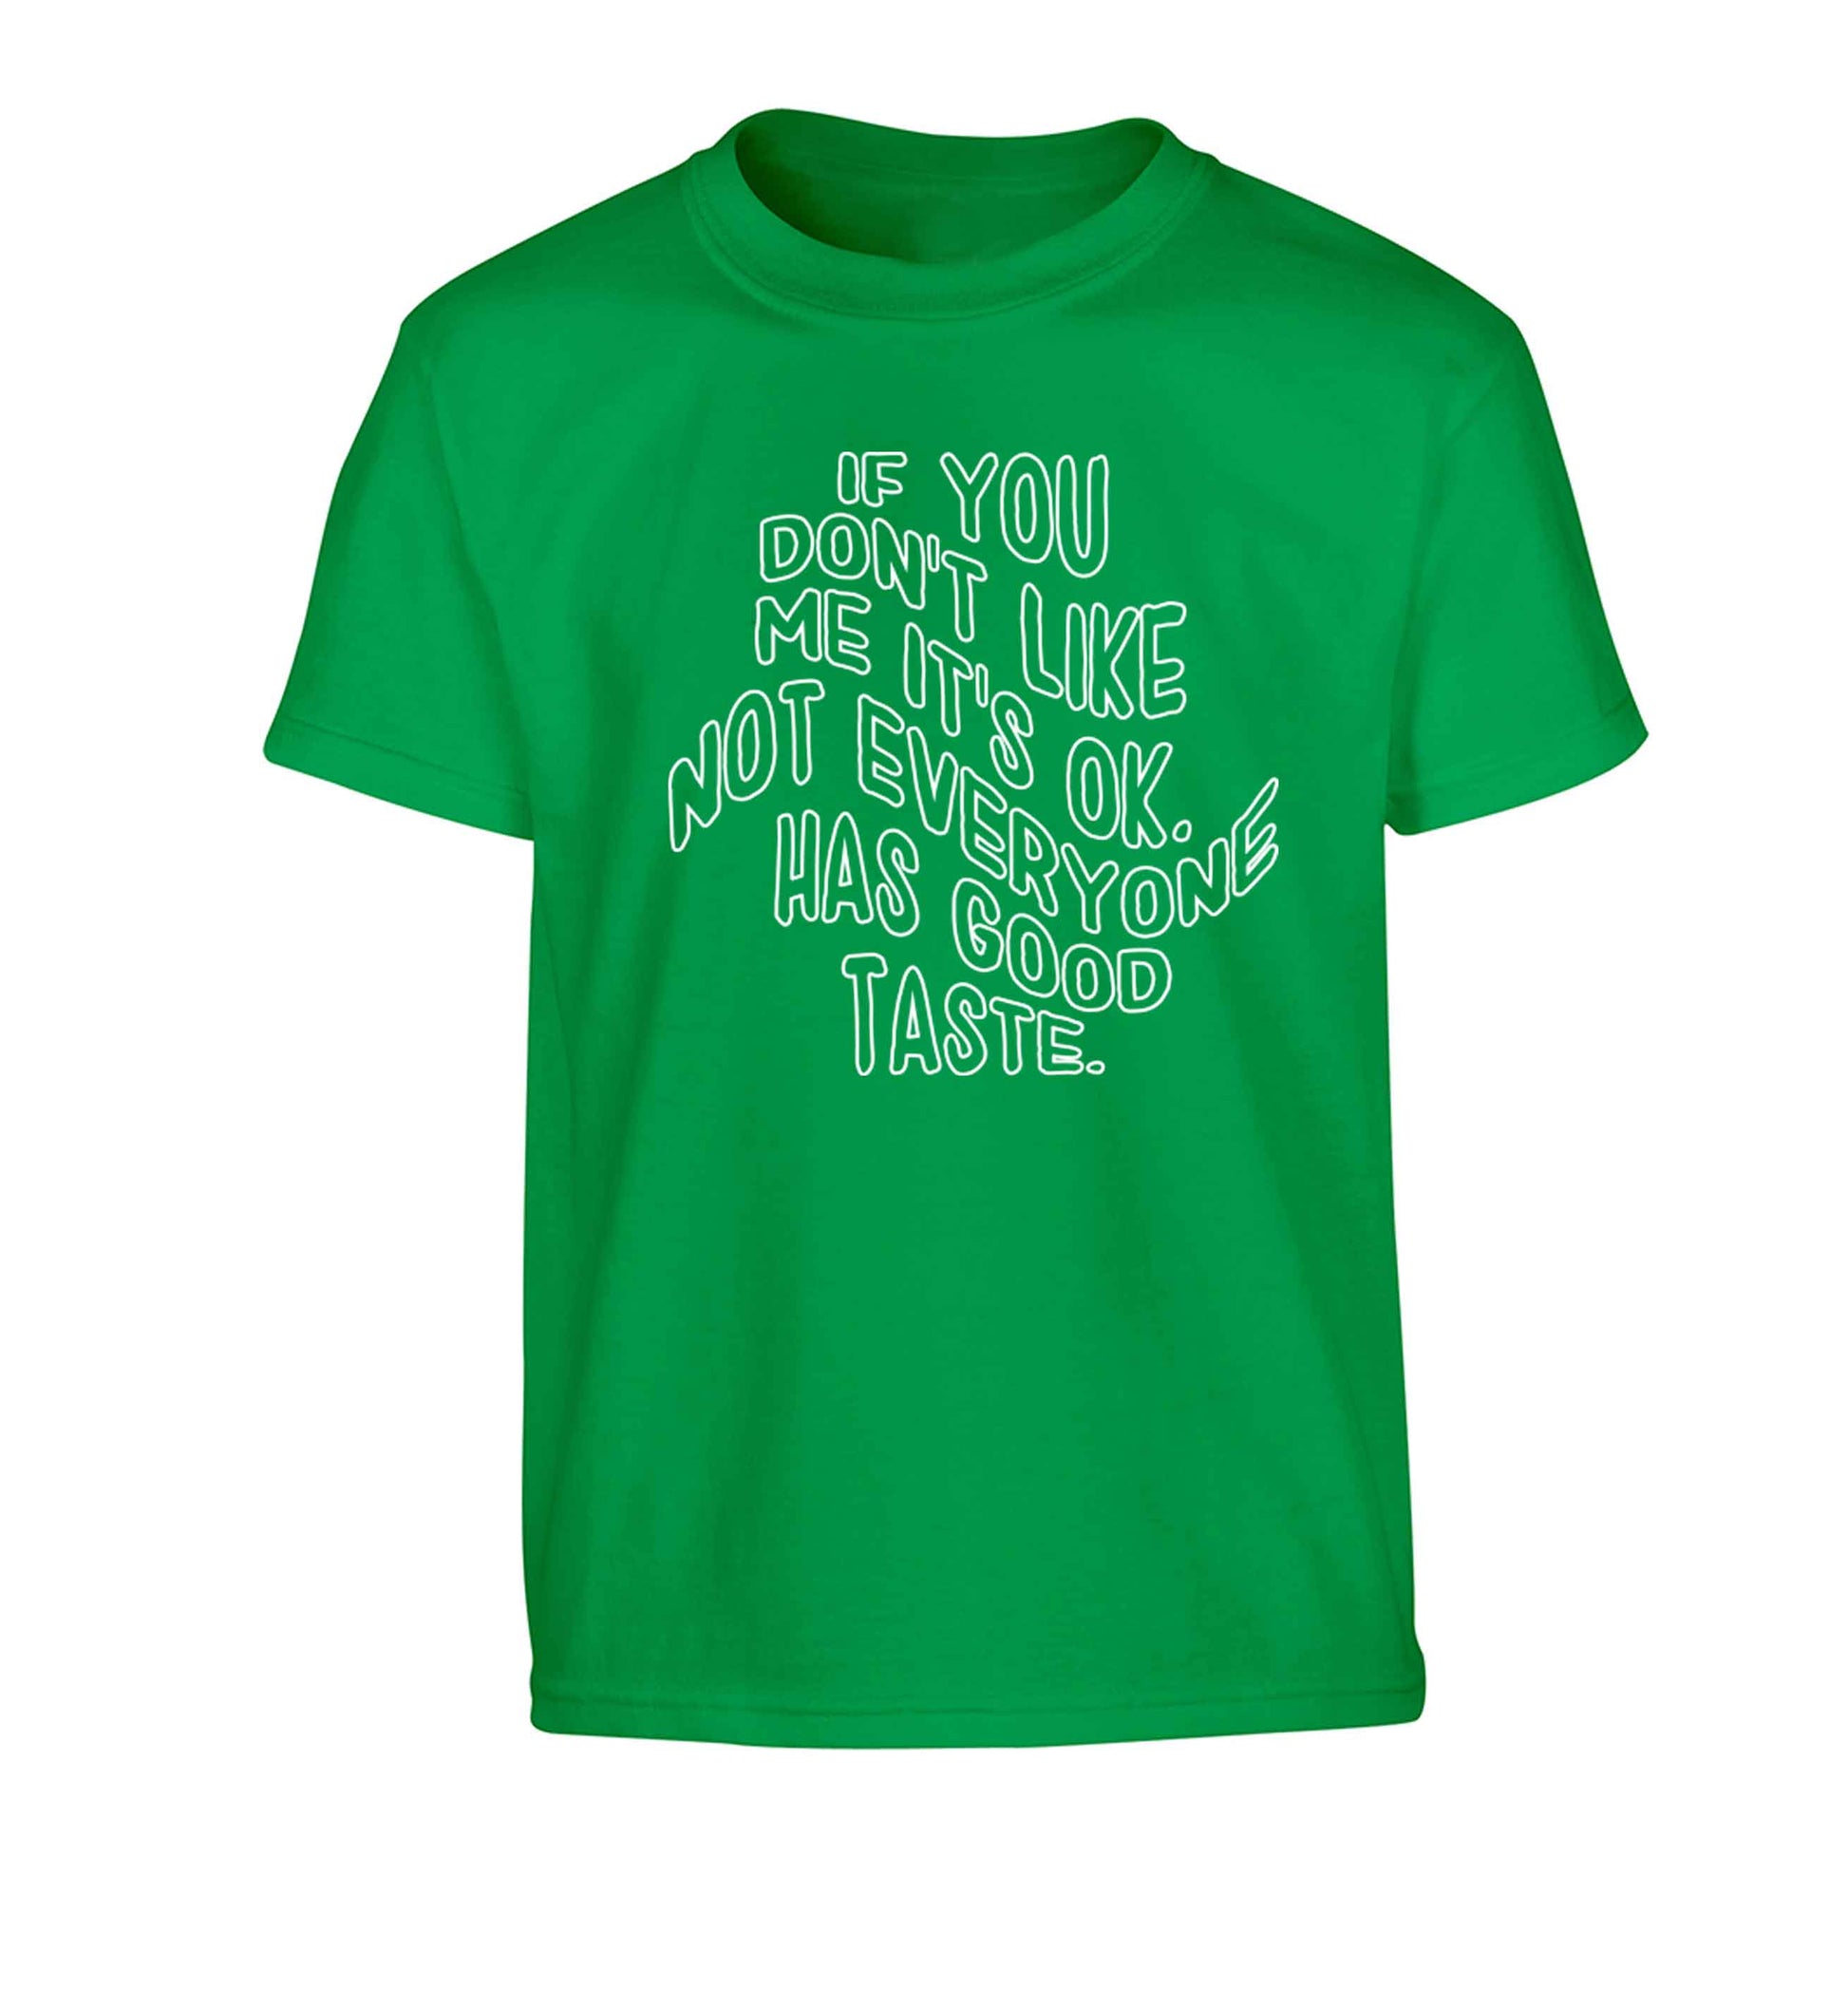 If you don't like me it's ok not everyone has good taste Children's green Tshirt 12-13 Years